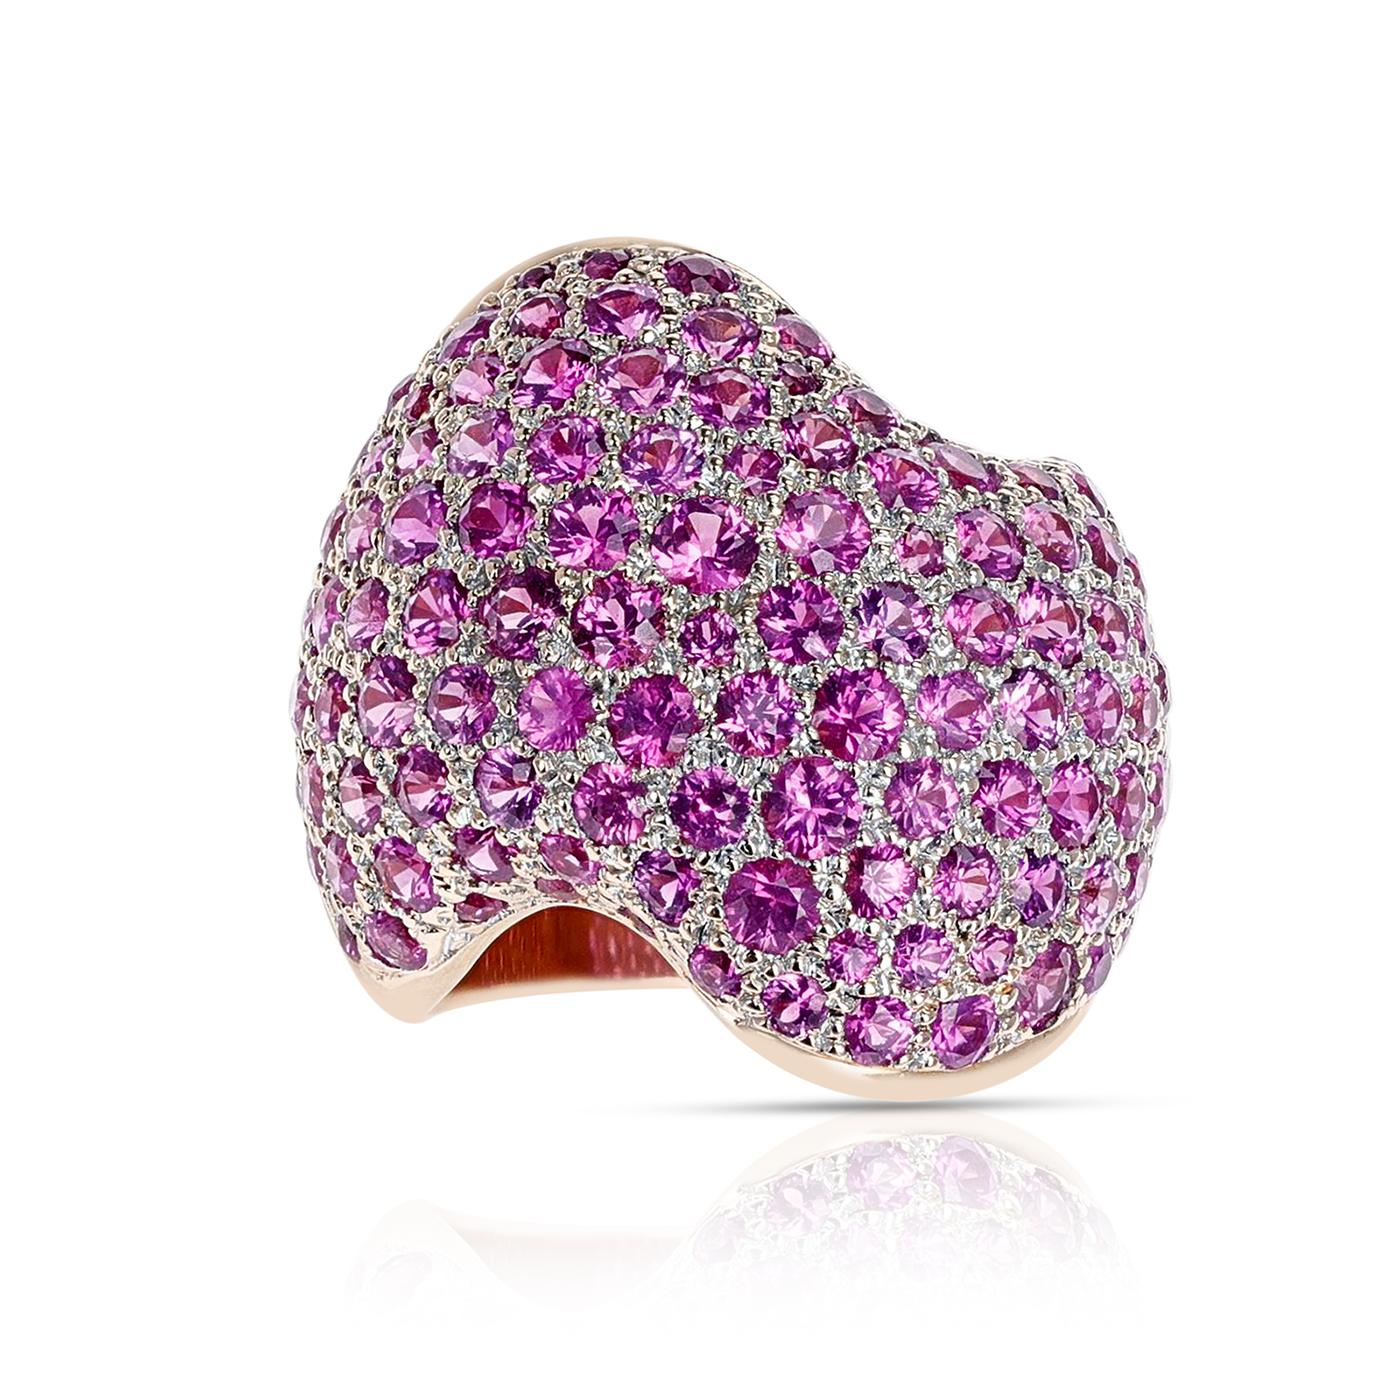 A statement Van Cleef & Arpels Pink Sapphire Swerve Cocktail Ring made in 18K Rose Gold. Ring Size US 5. 

SKU: 576-EMELJQJW
